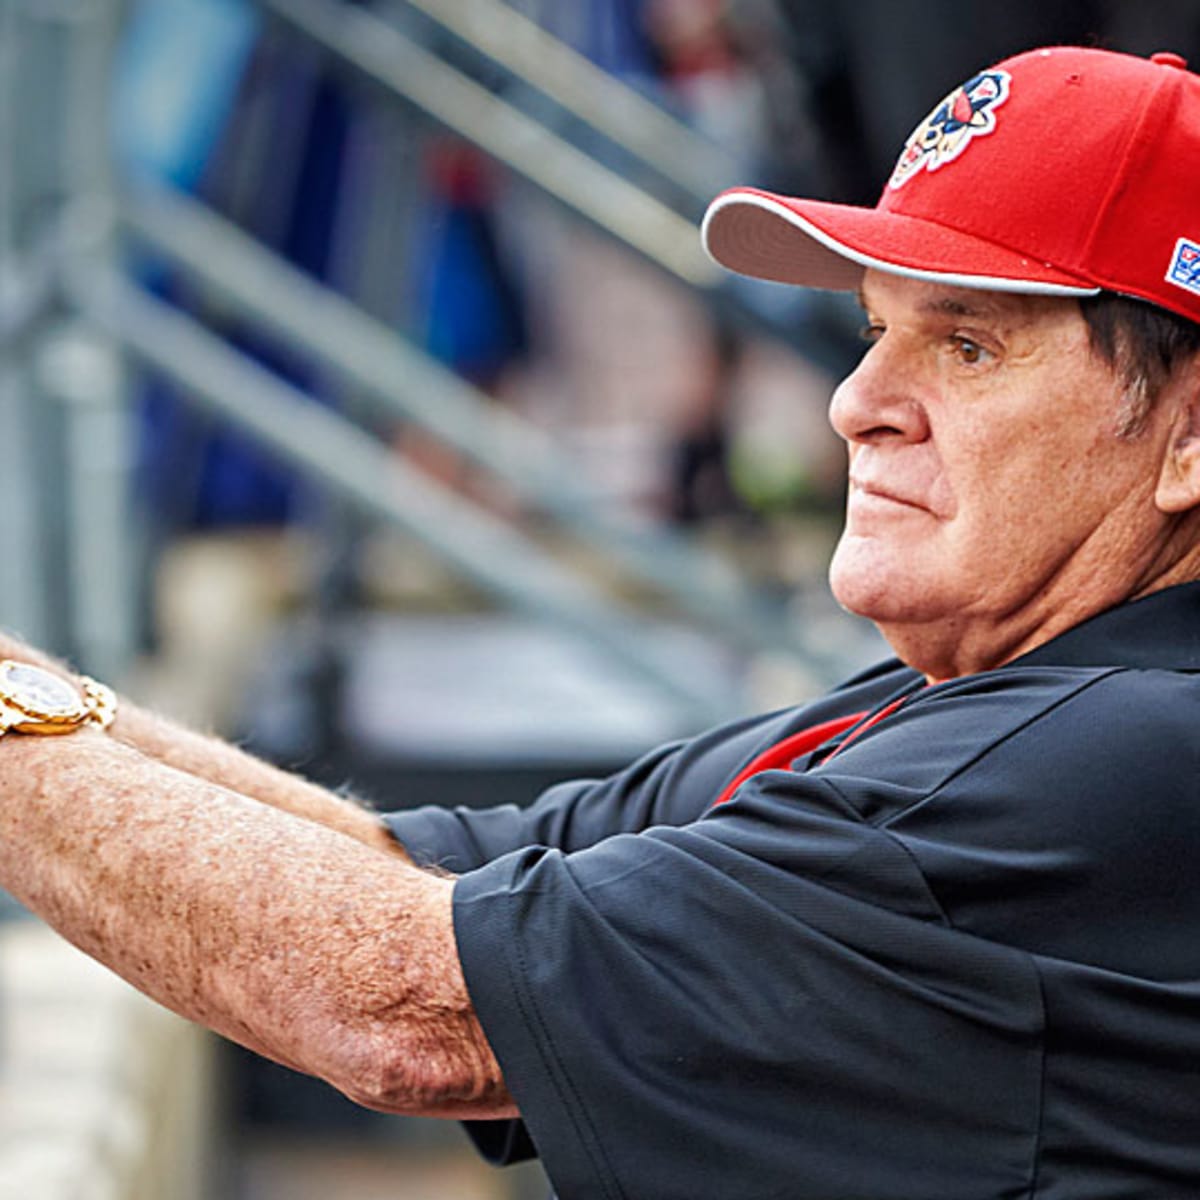 No public apologies for Pete Rose's live TV broadcast remarks